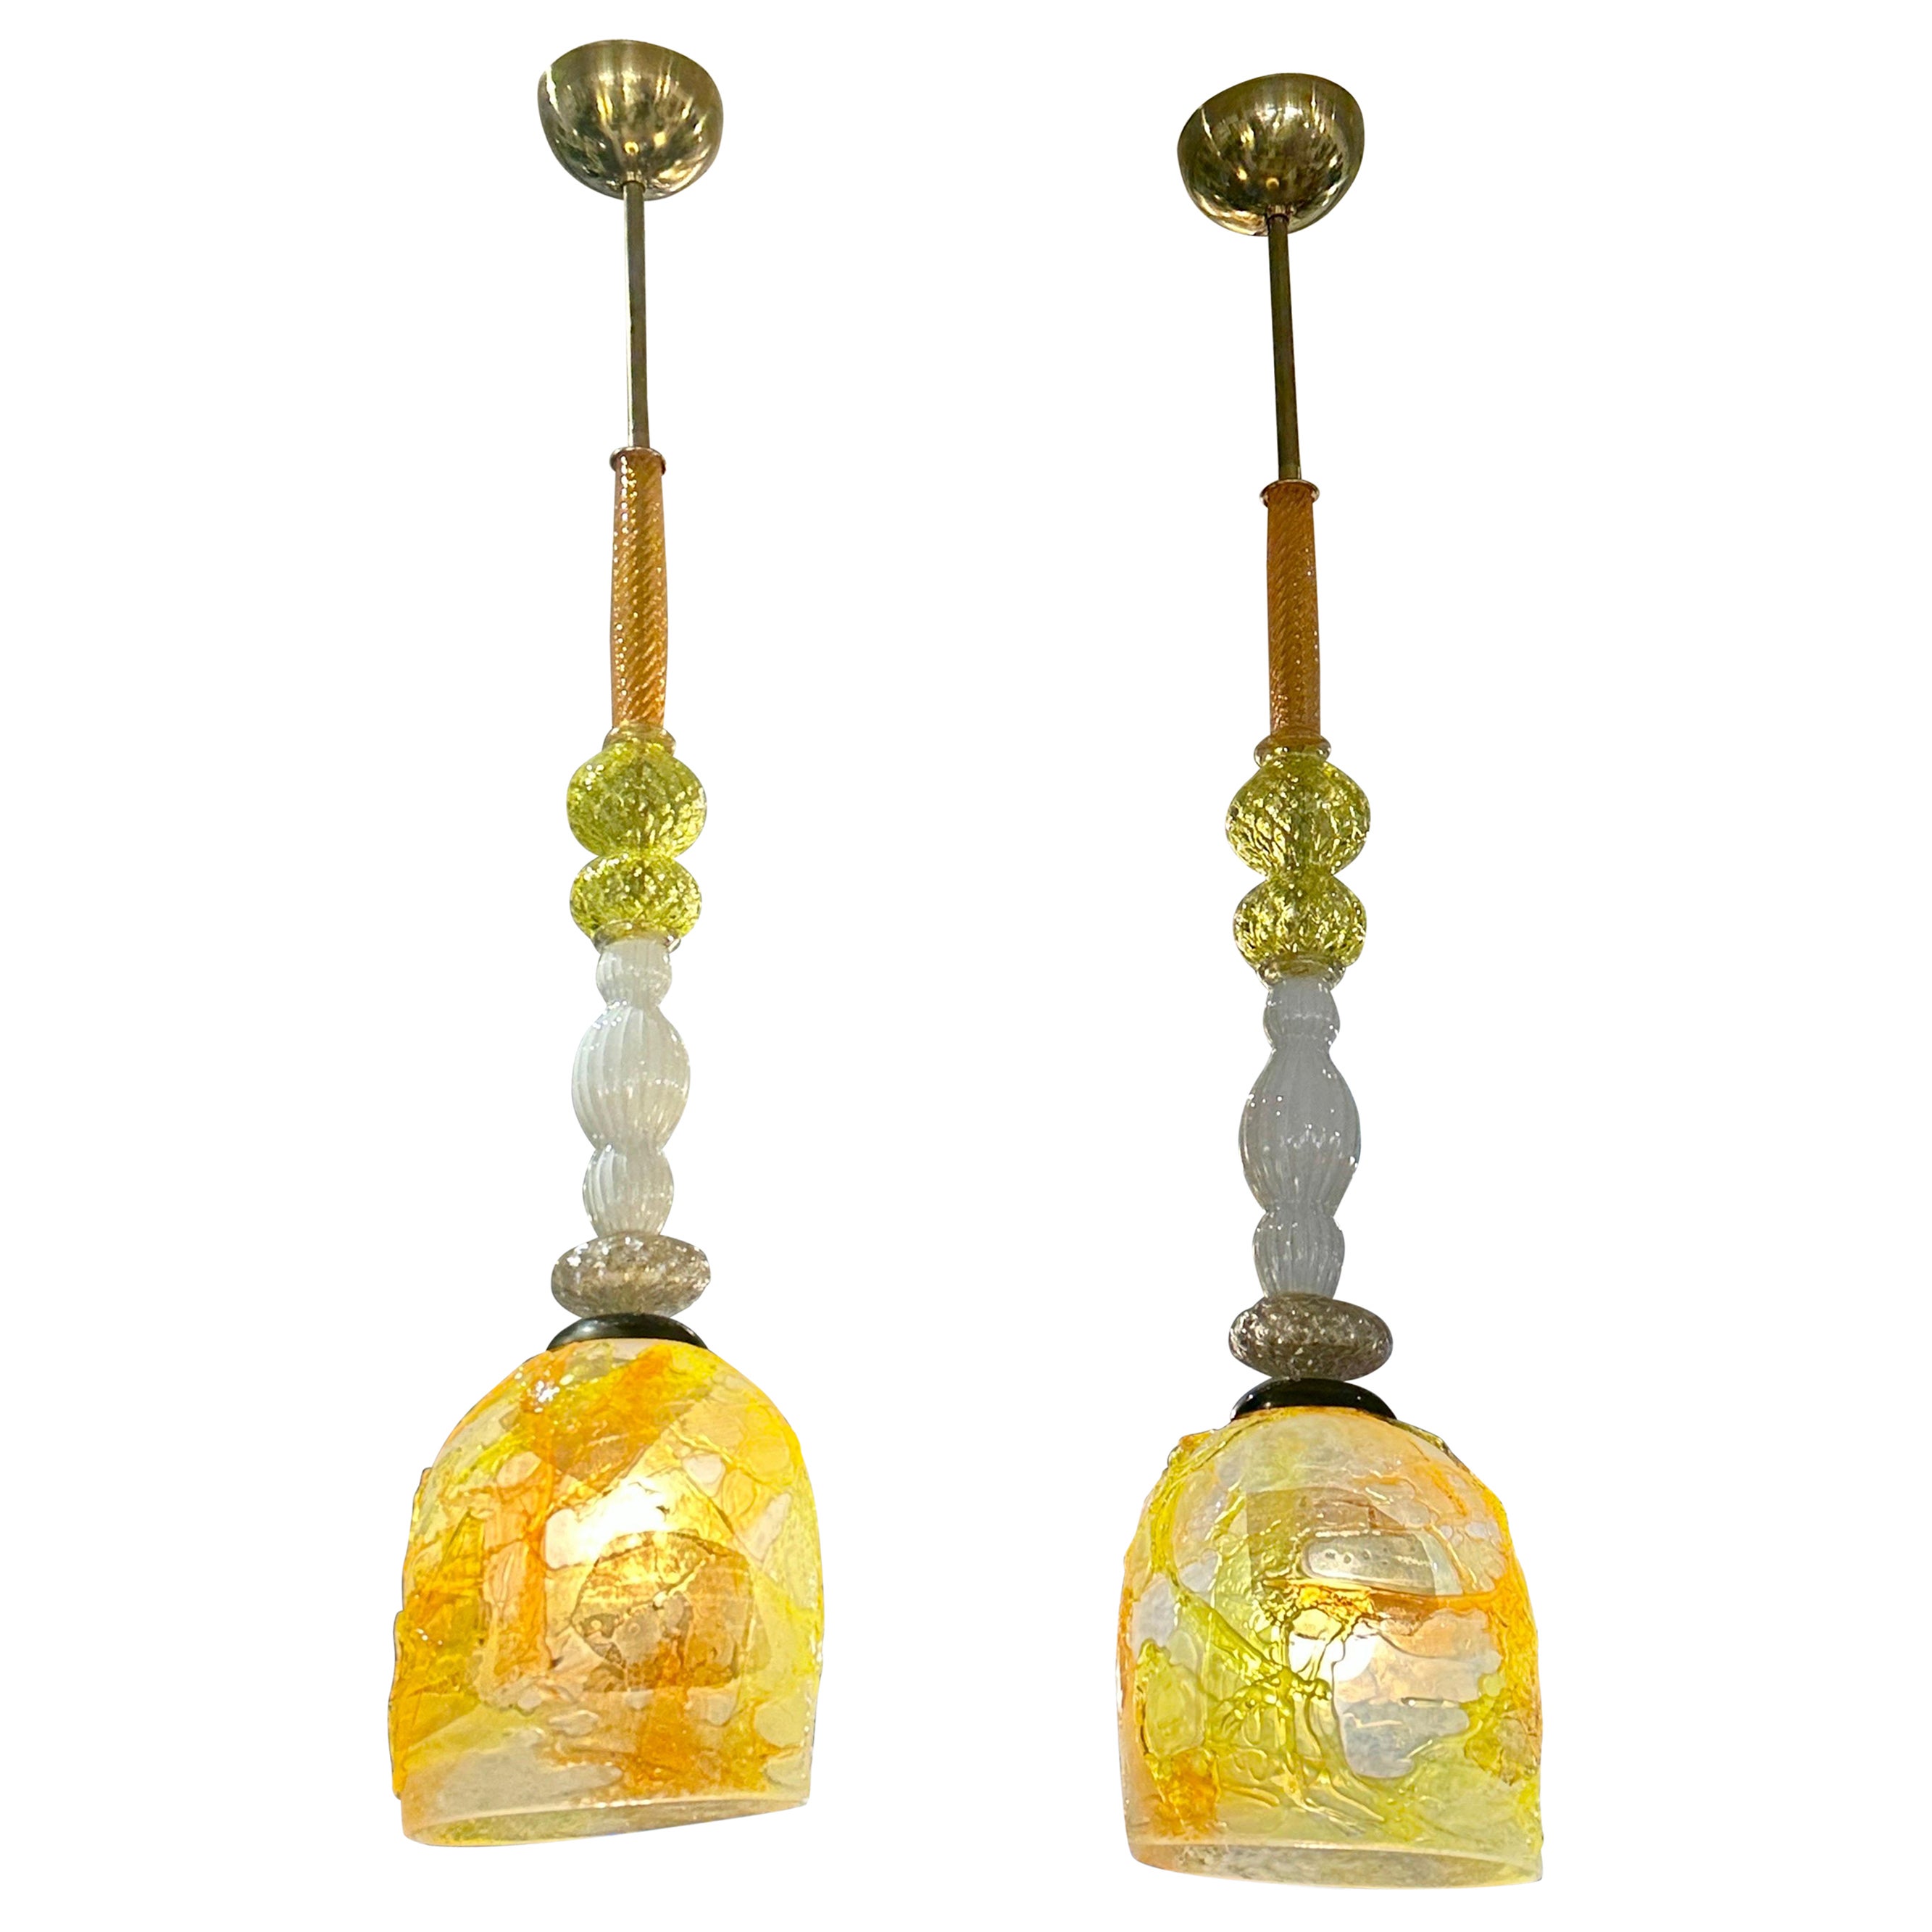 Unique Murano Glass Pendant Lights (2 Available - Sold individually)